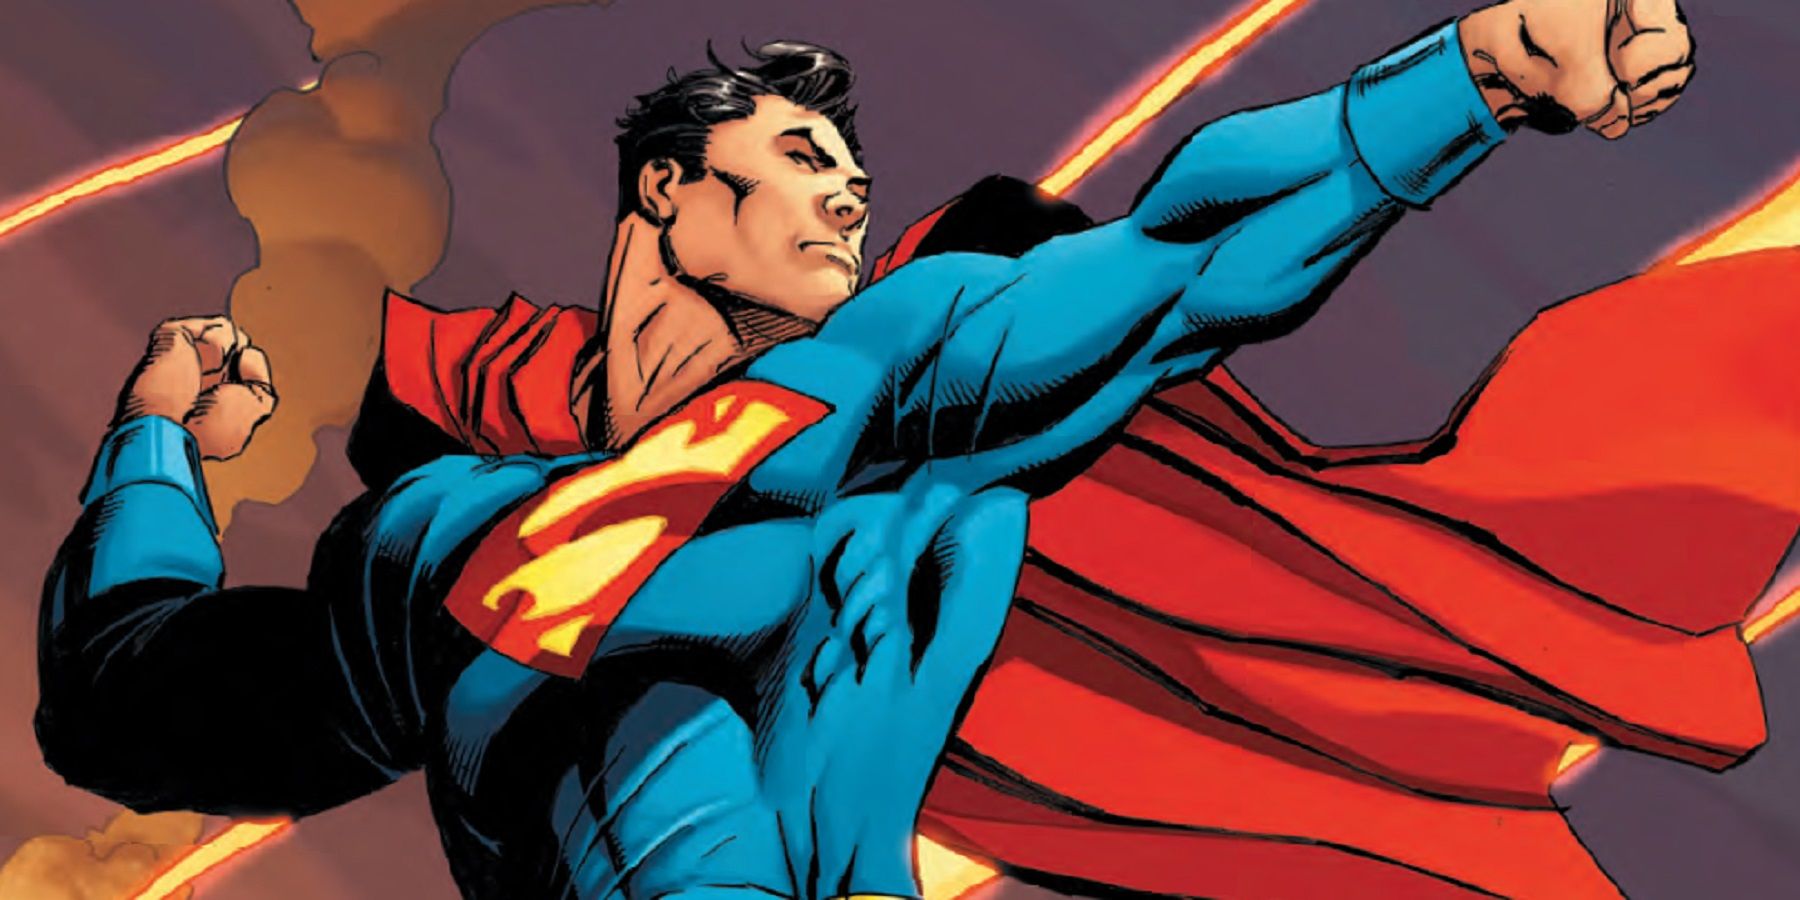 DC Comics' Superman Pointing One Fist Sideways & The Other Up